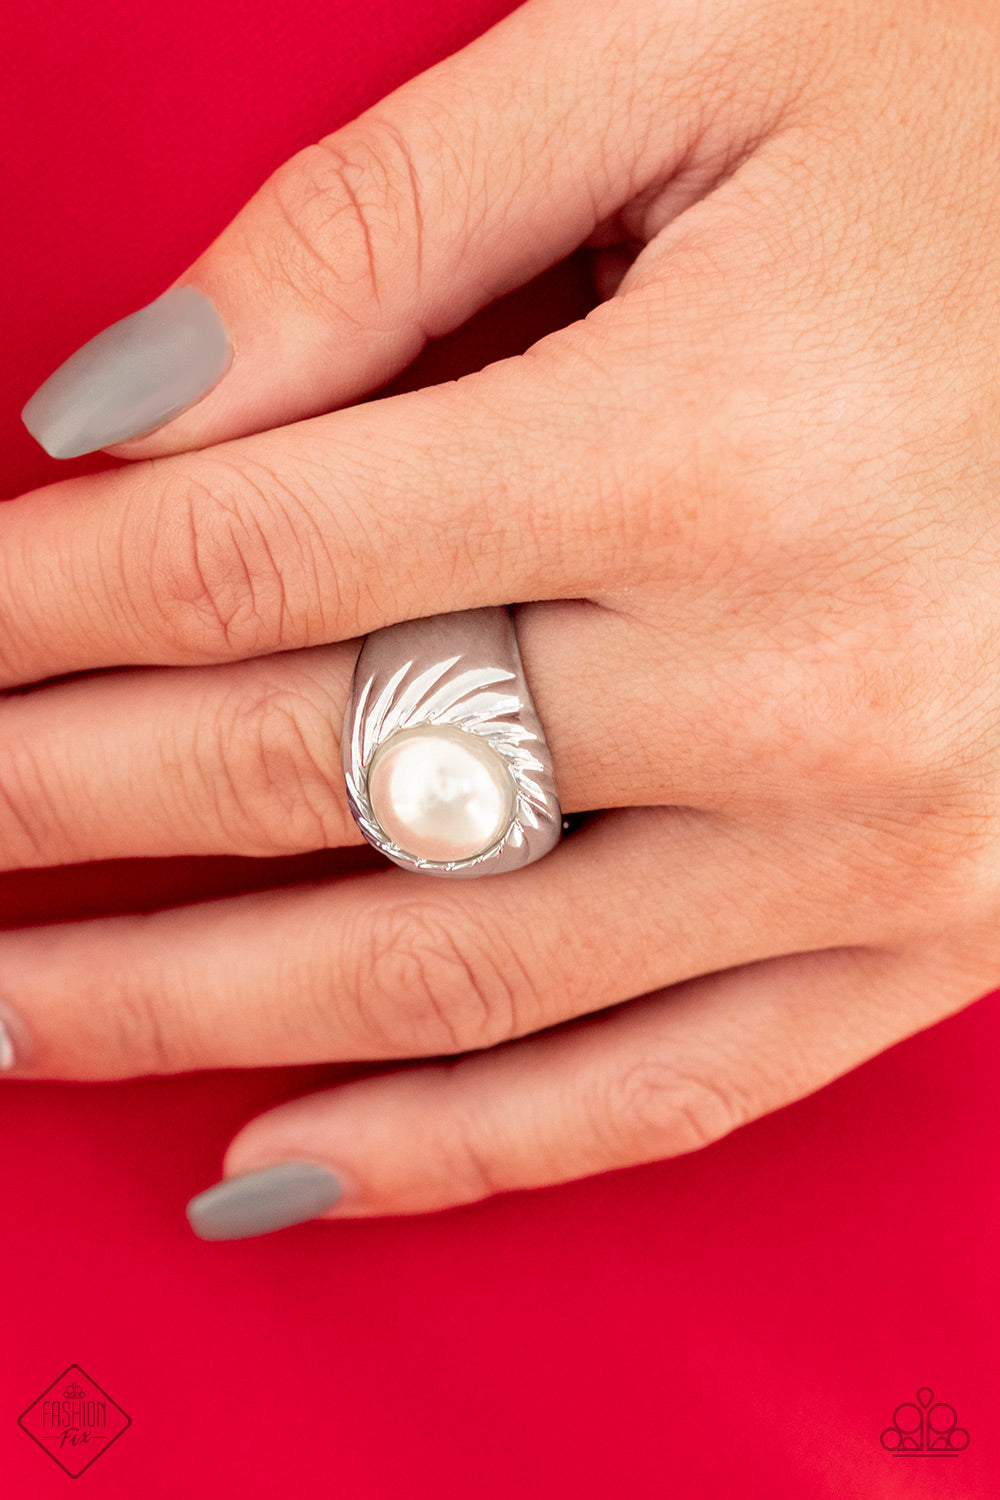 Wall Street Whimsical - white pearl ring